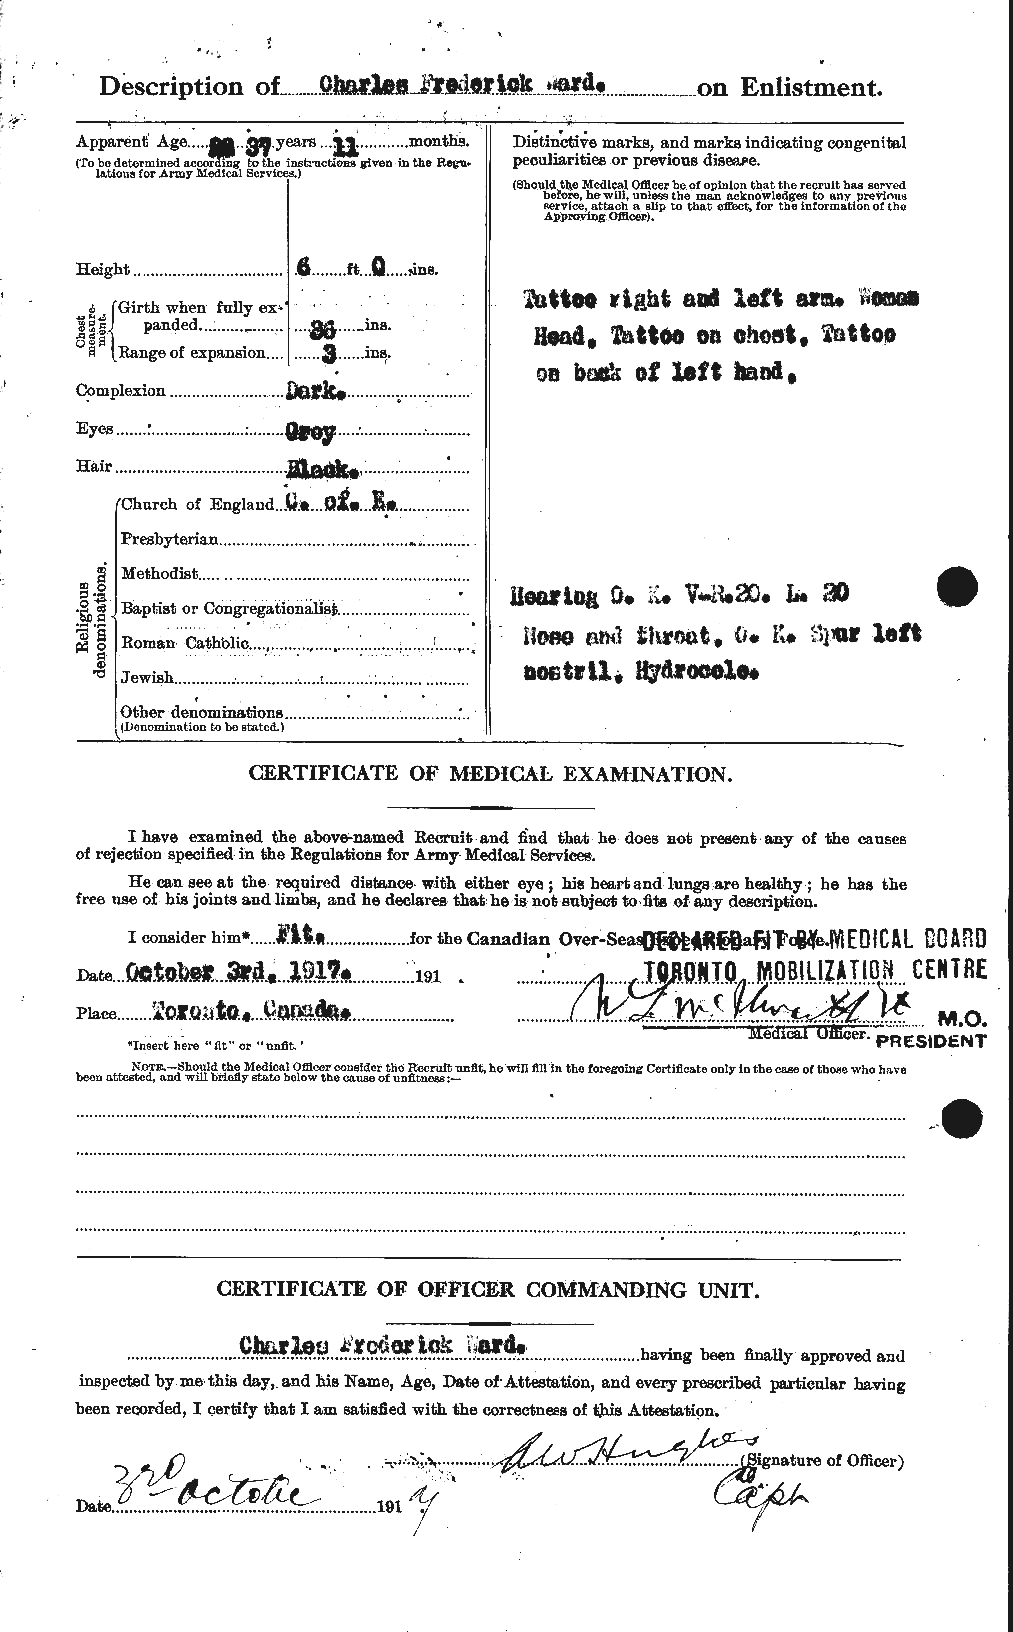 Personnel Records of the First World War - CEF 657578b